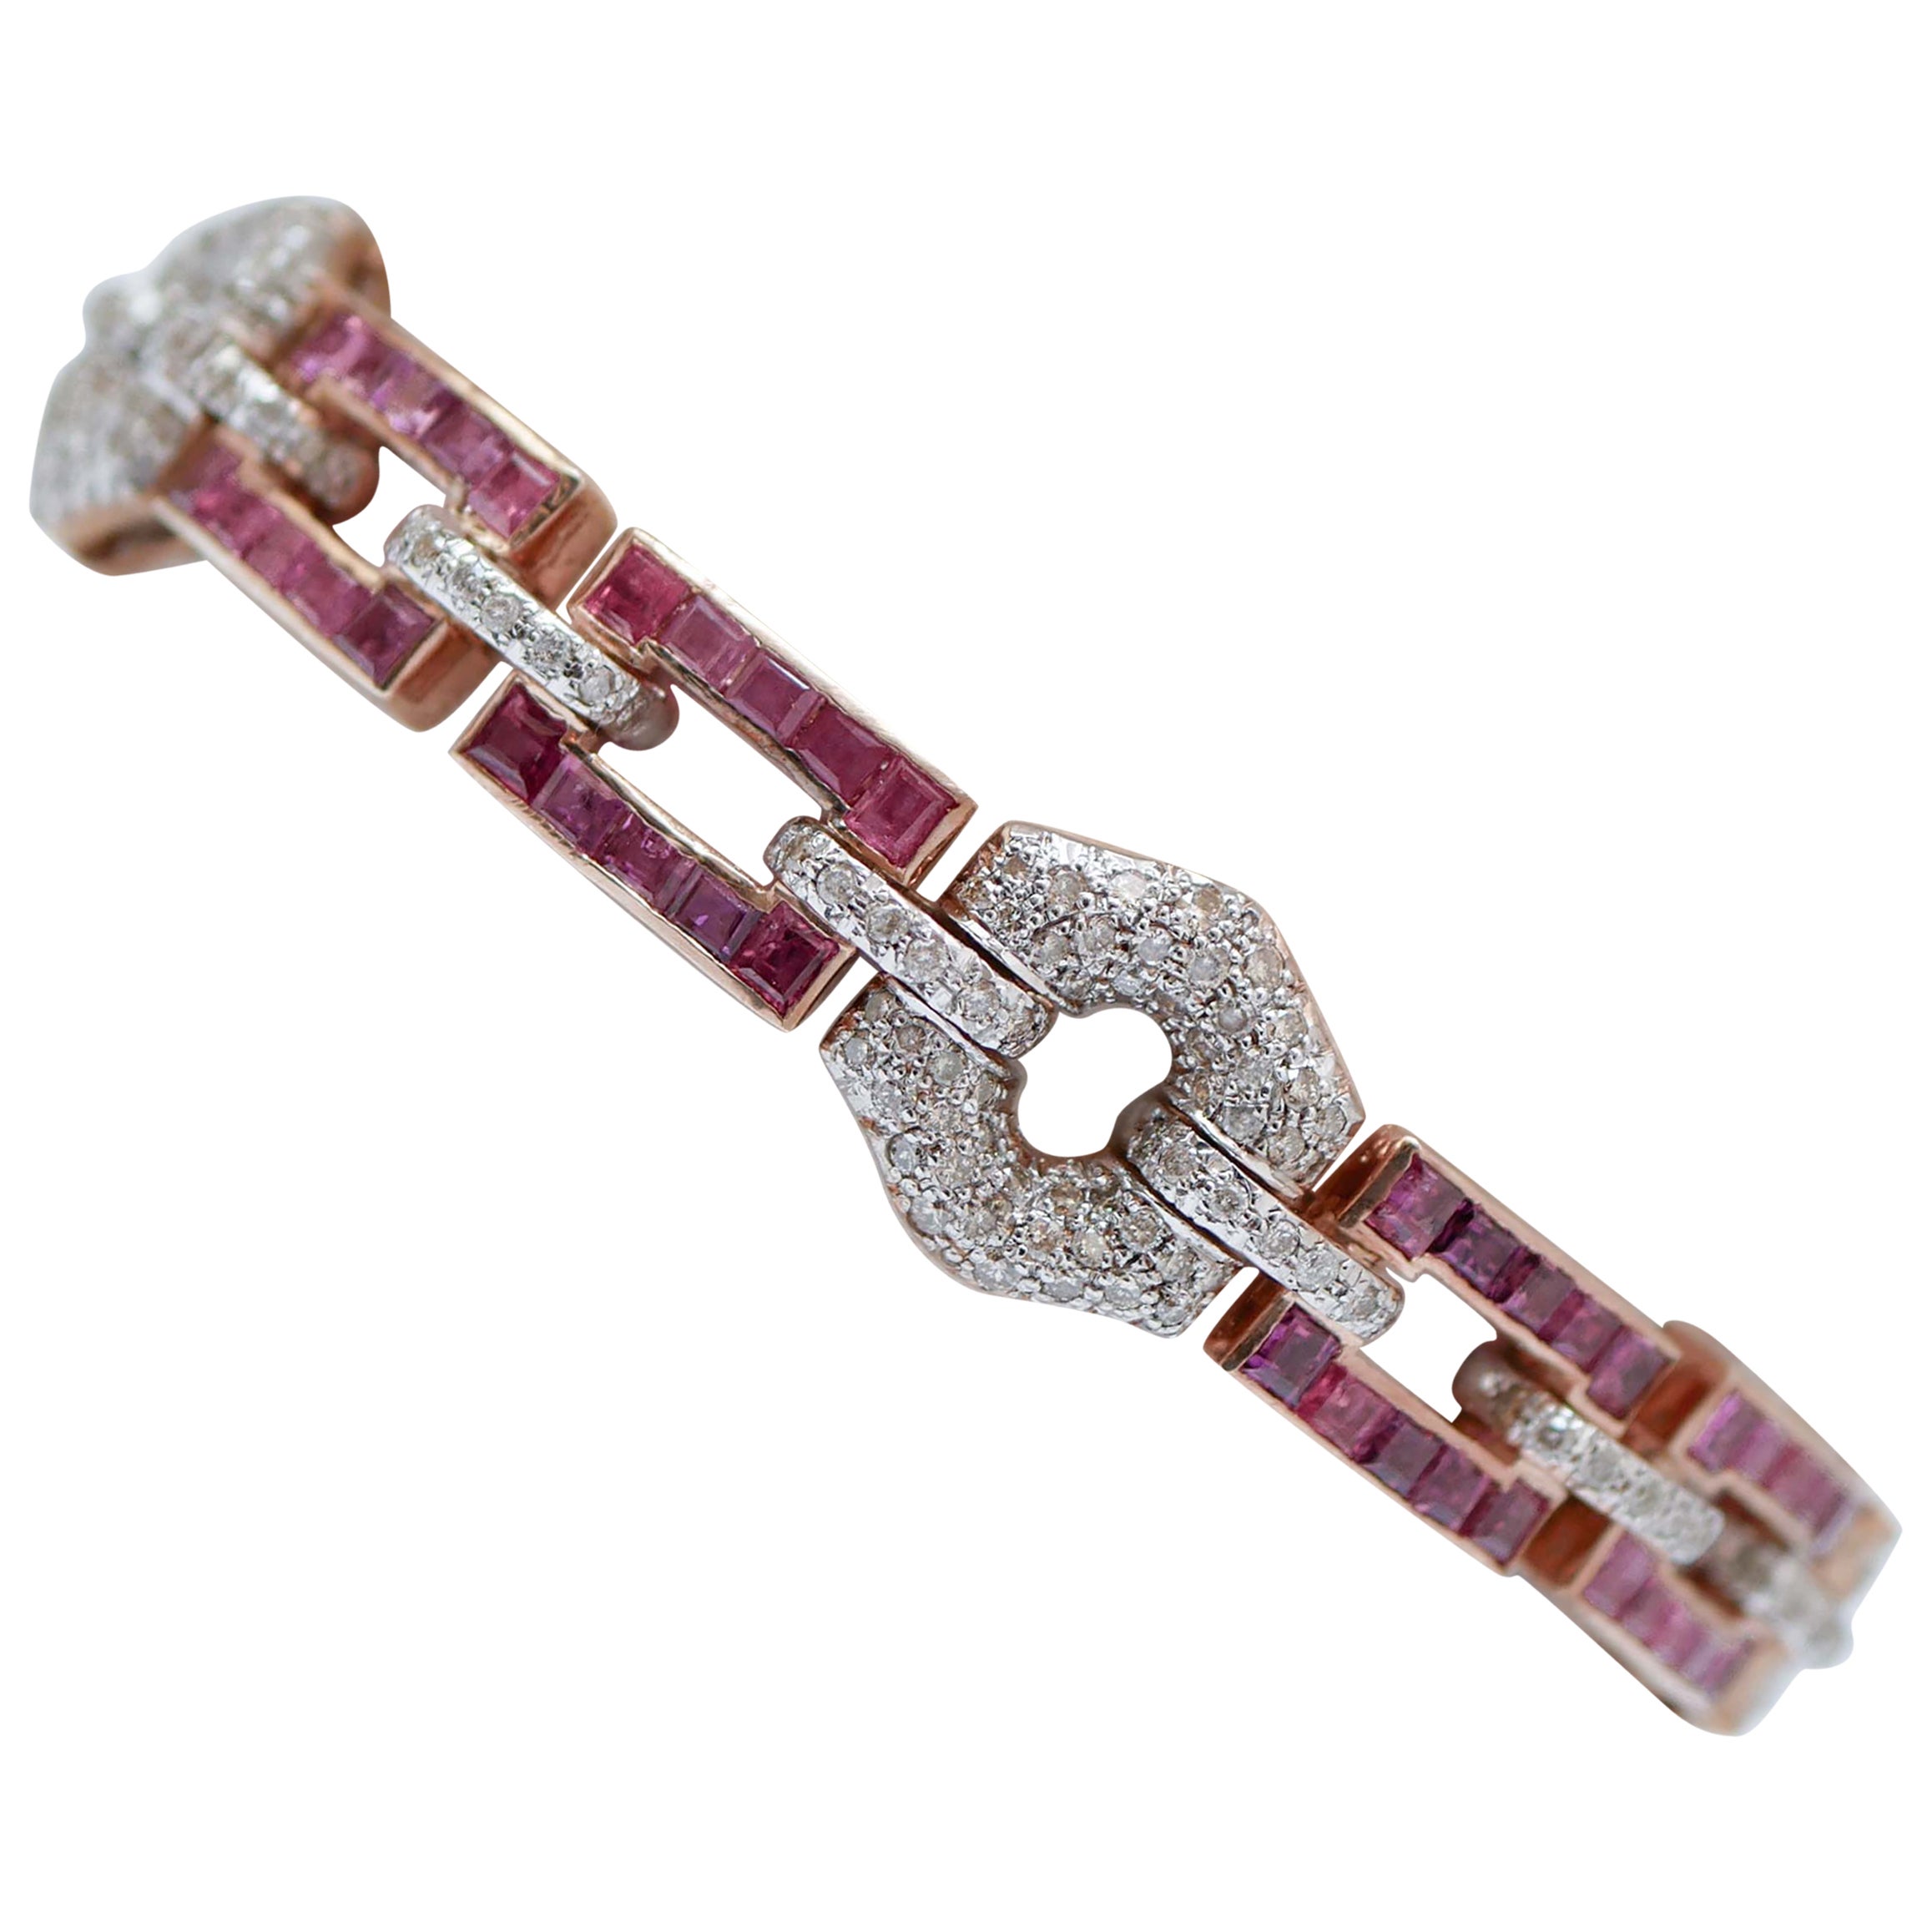 Rubies, Diamonds, Rose Gold and Silver Link Bracelet. For Sale